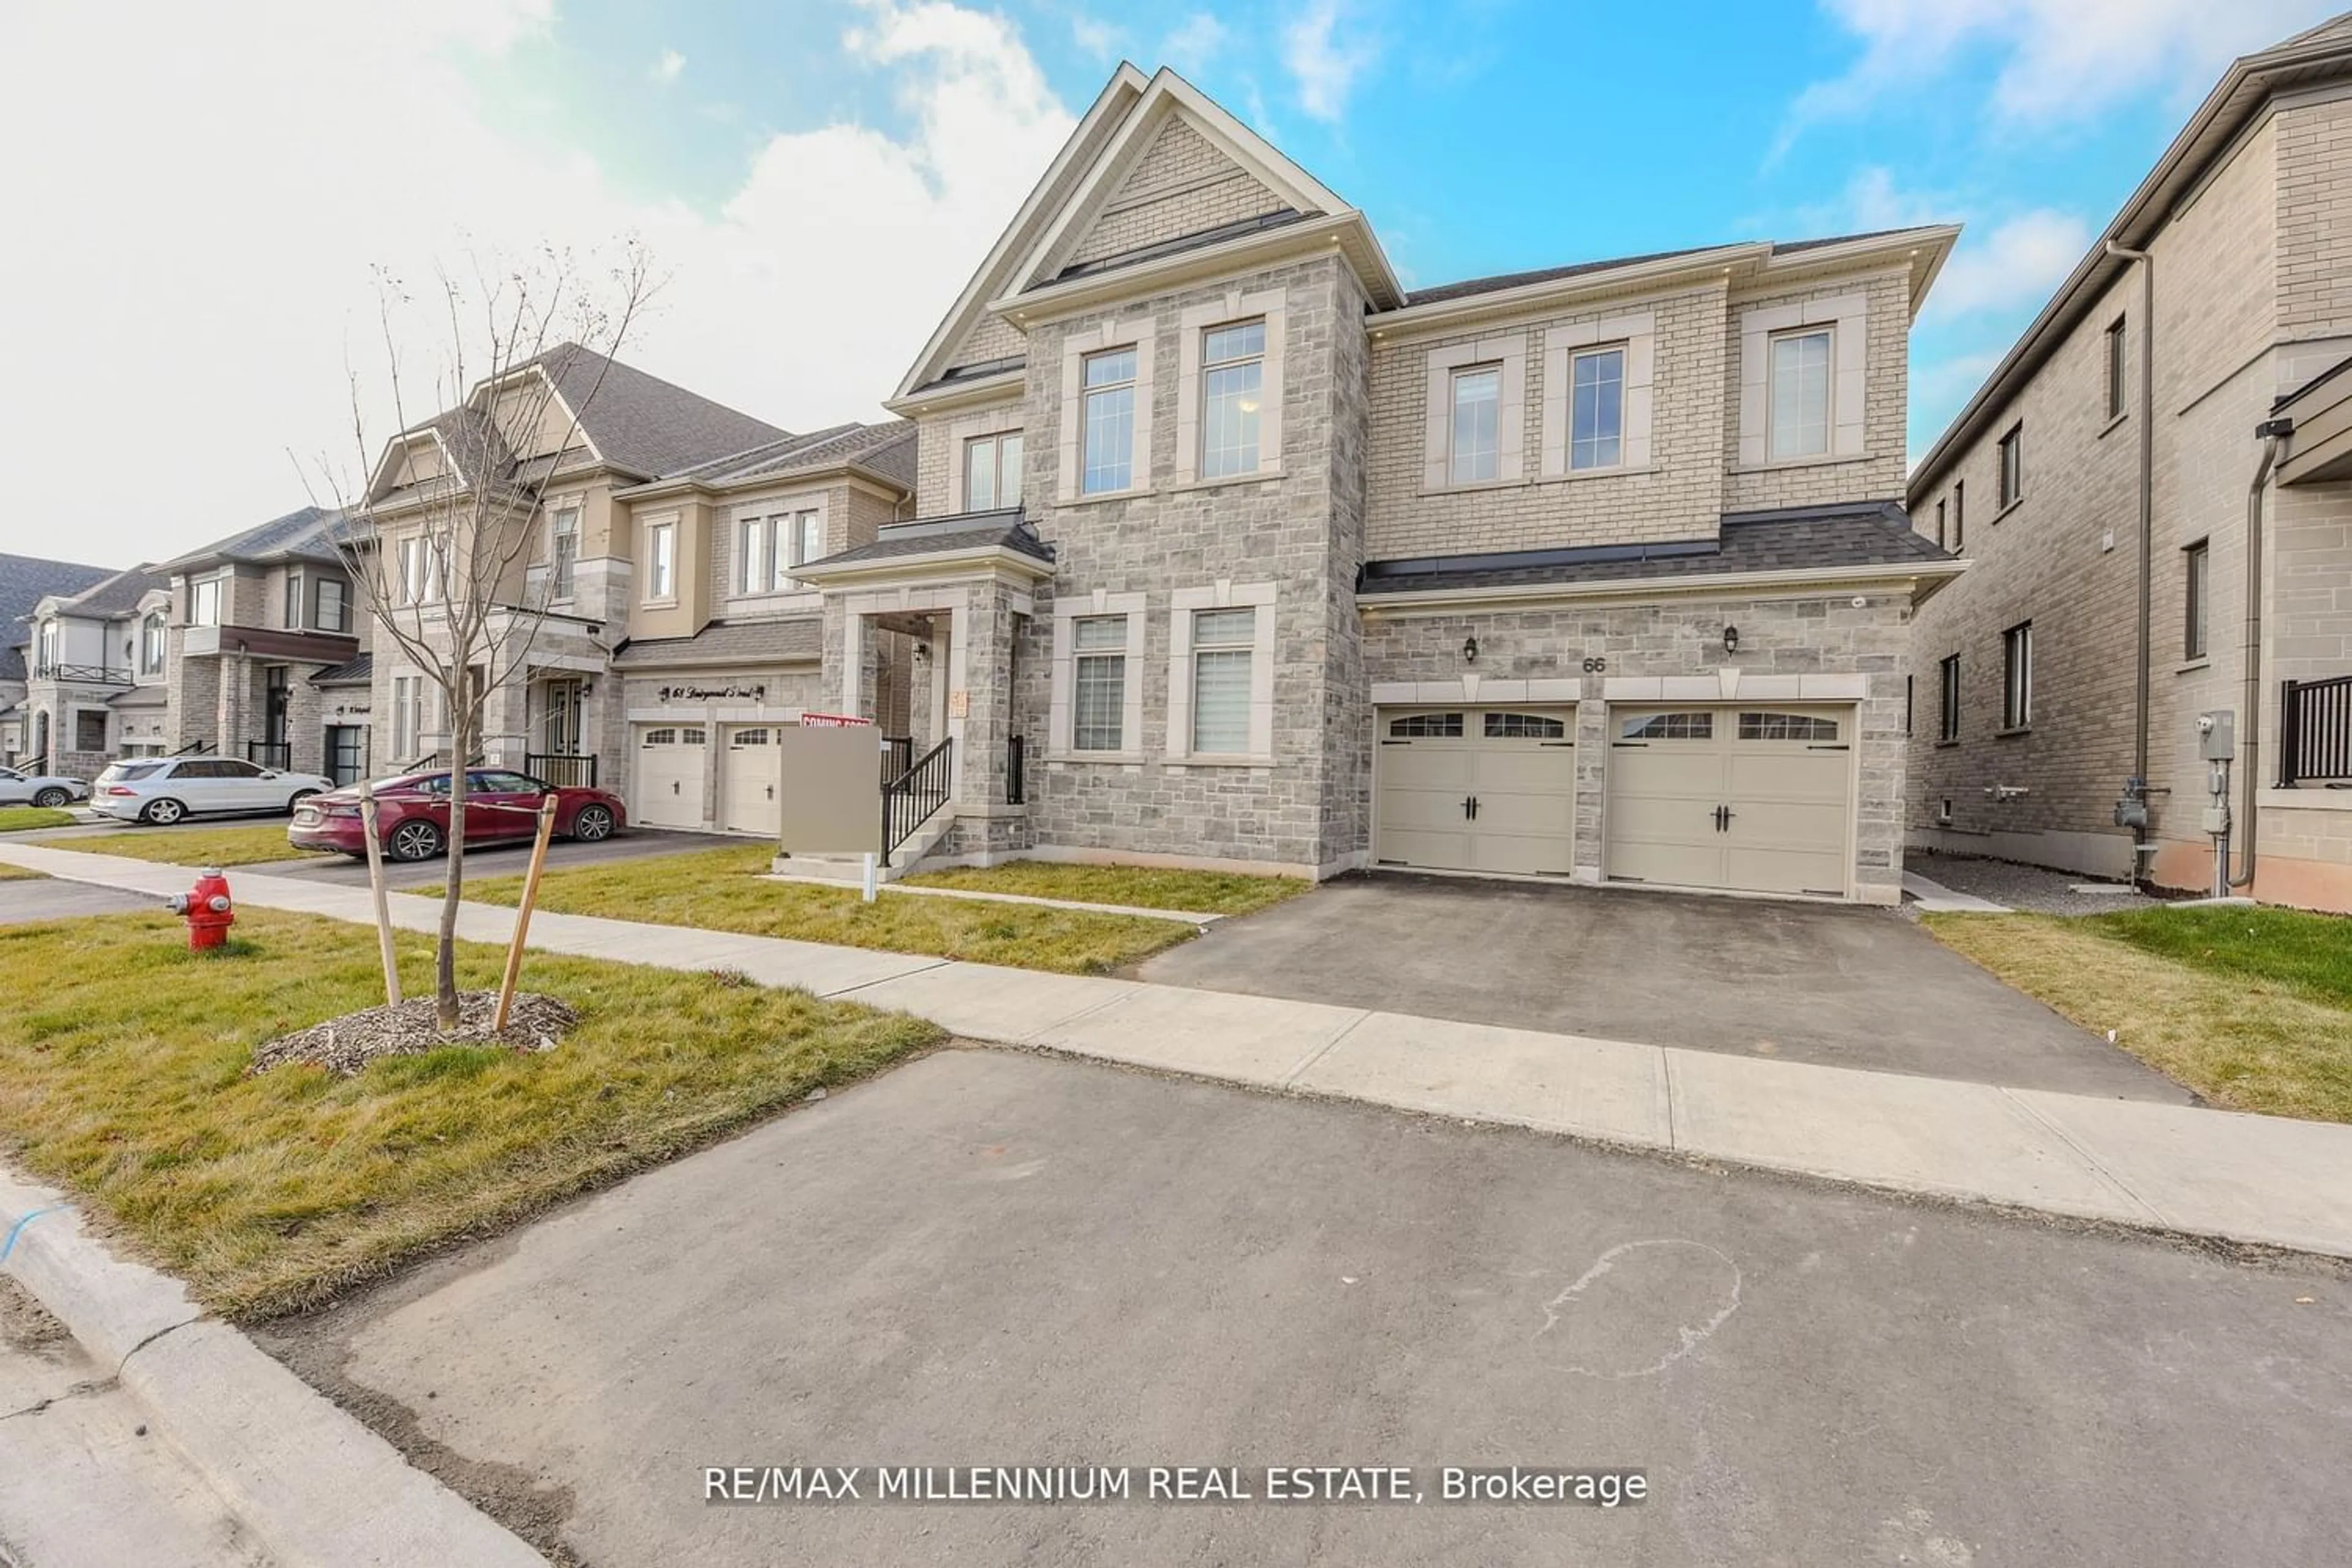 Frontside or backside of a home for 66 Dairymaid Rd, Brampton Ontario L6X 5R9